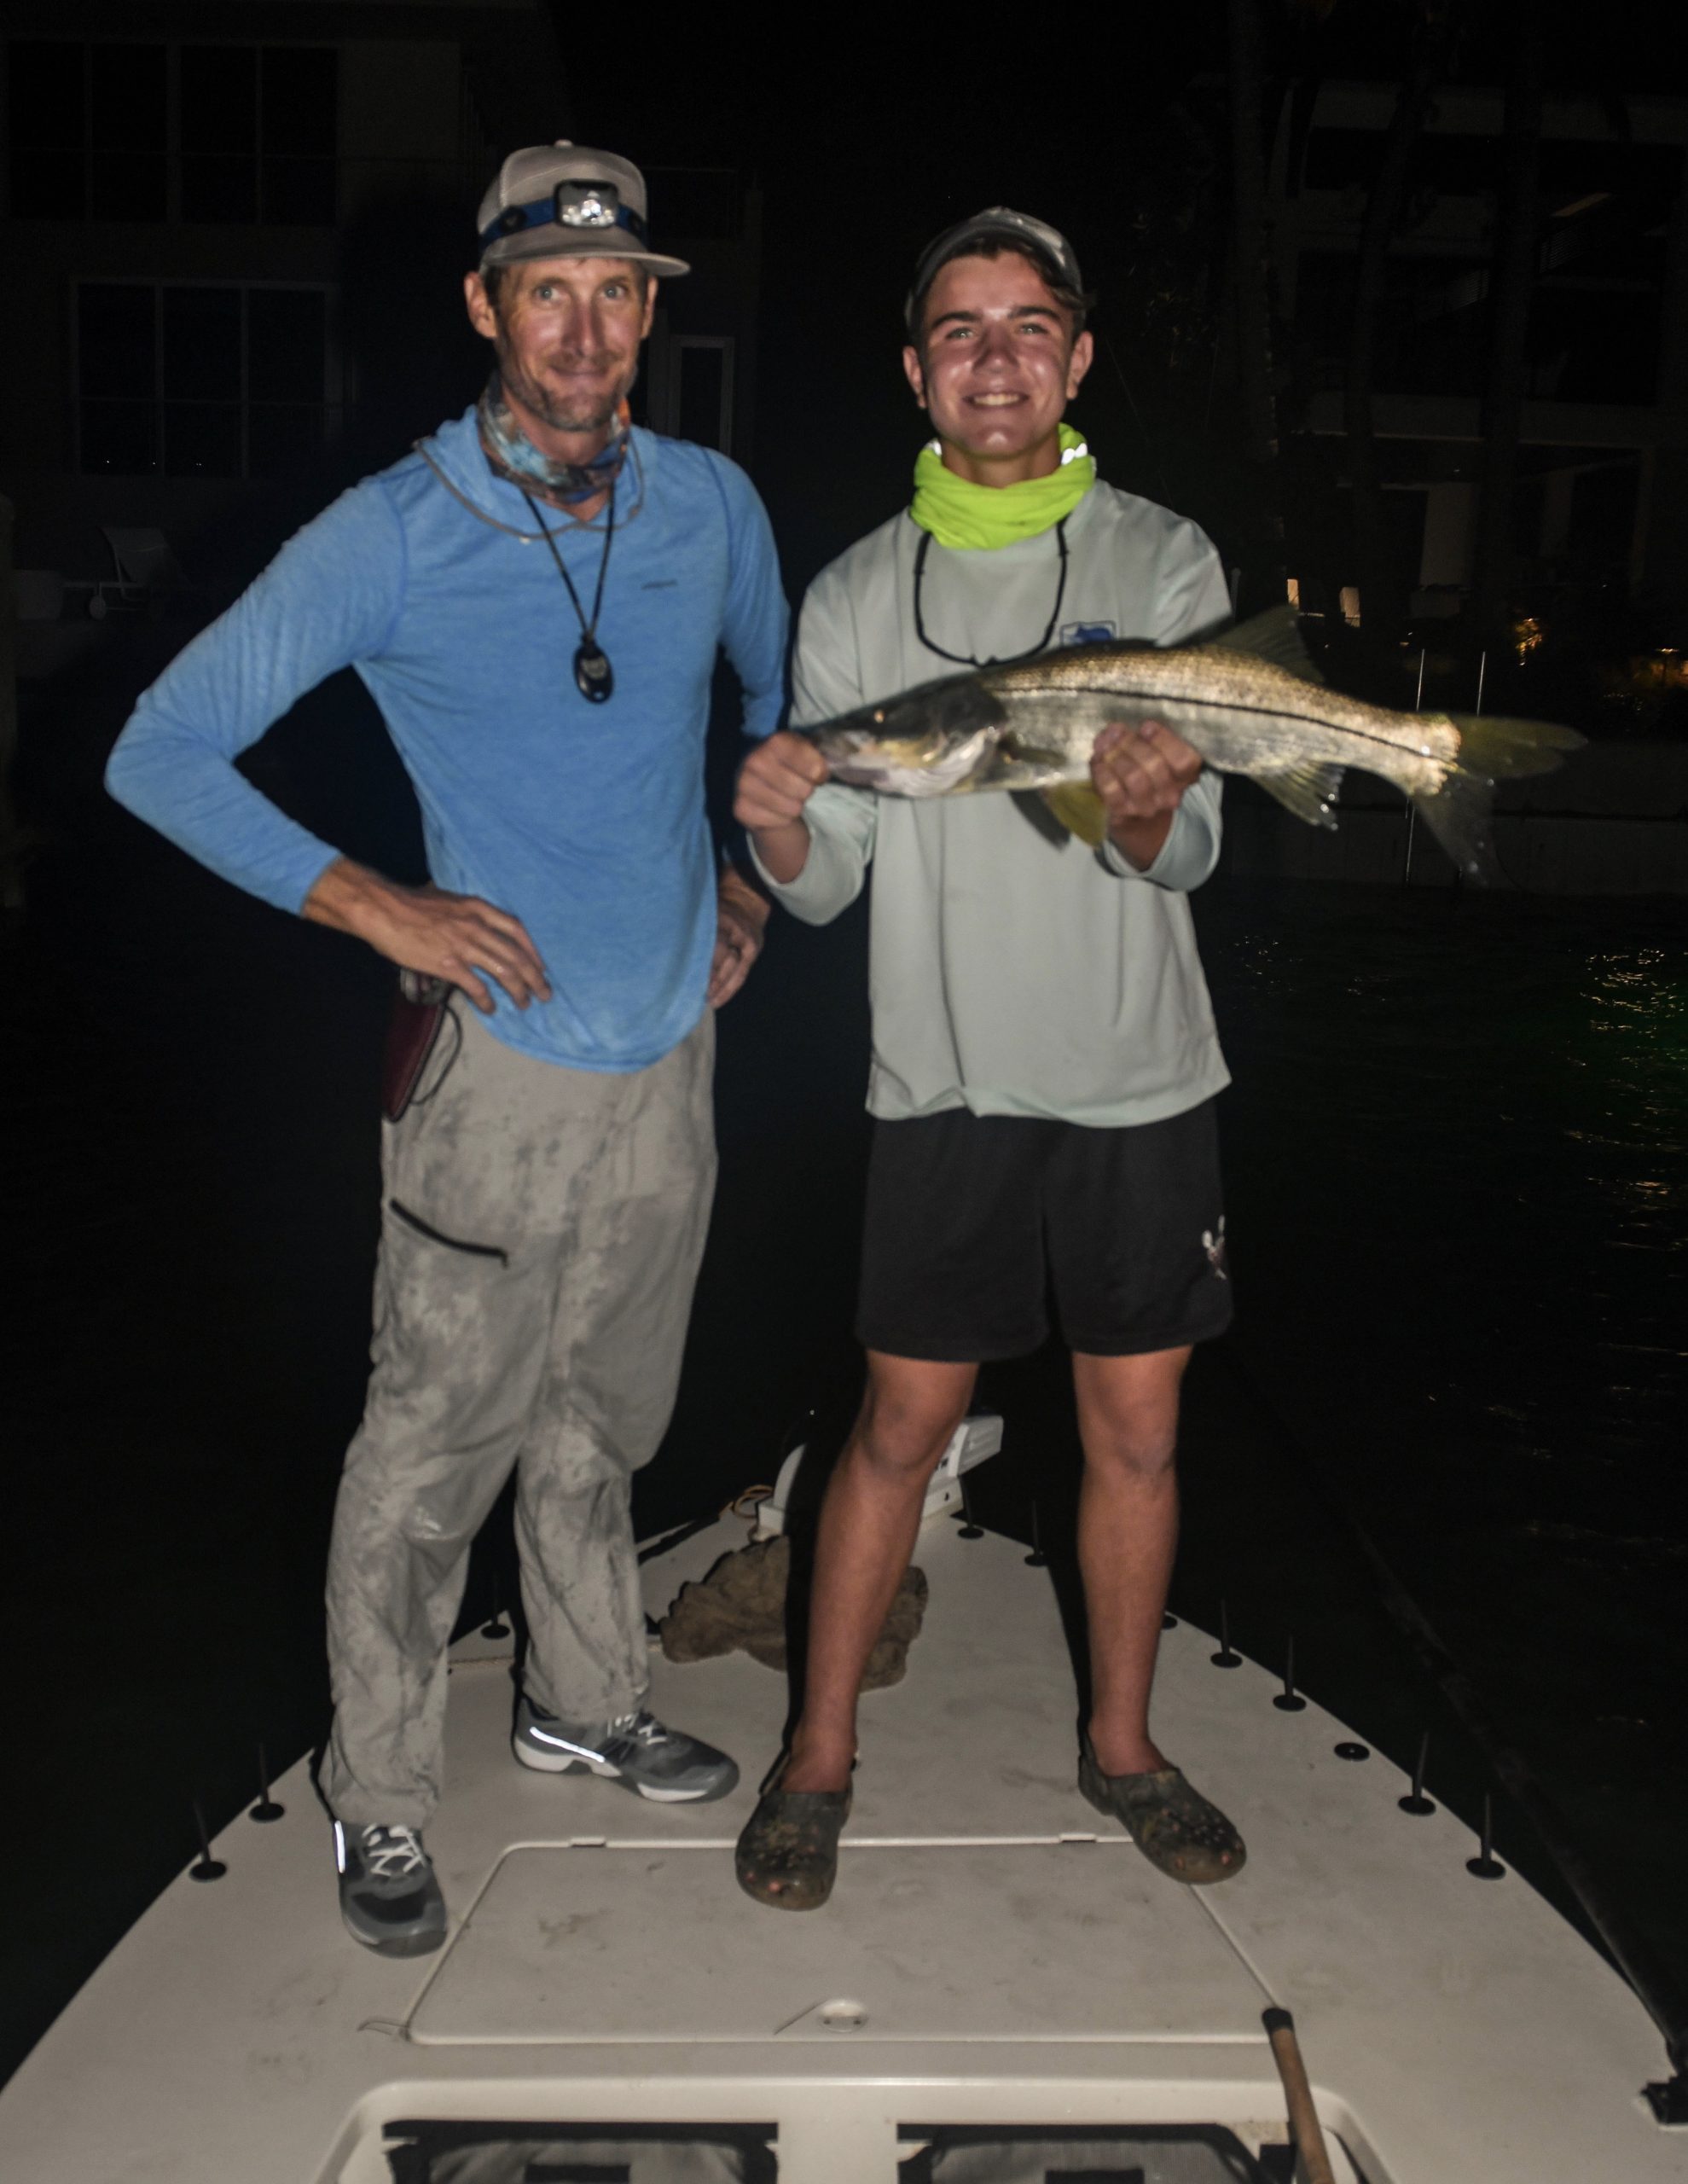 The author stands next to a fine young angler holding a snook